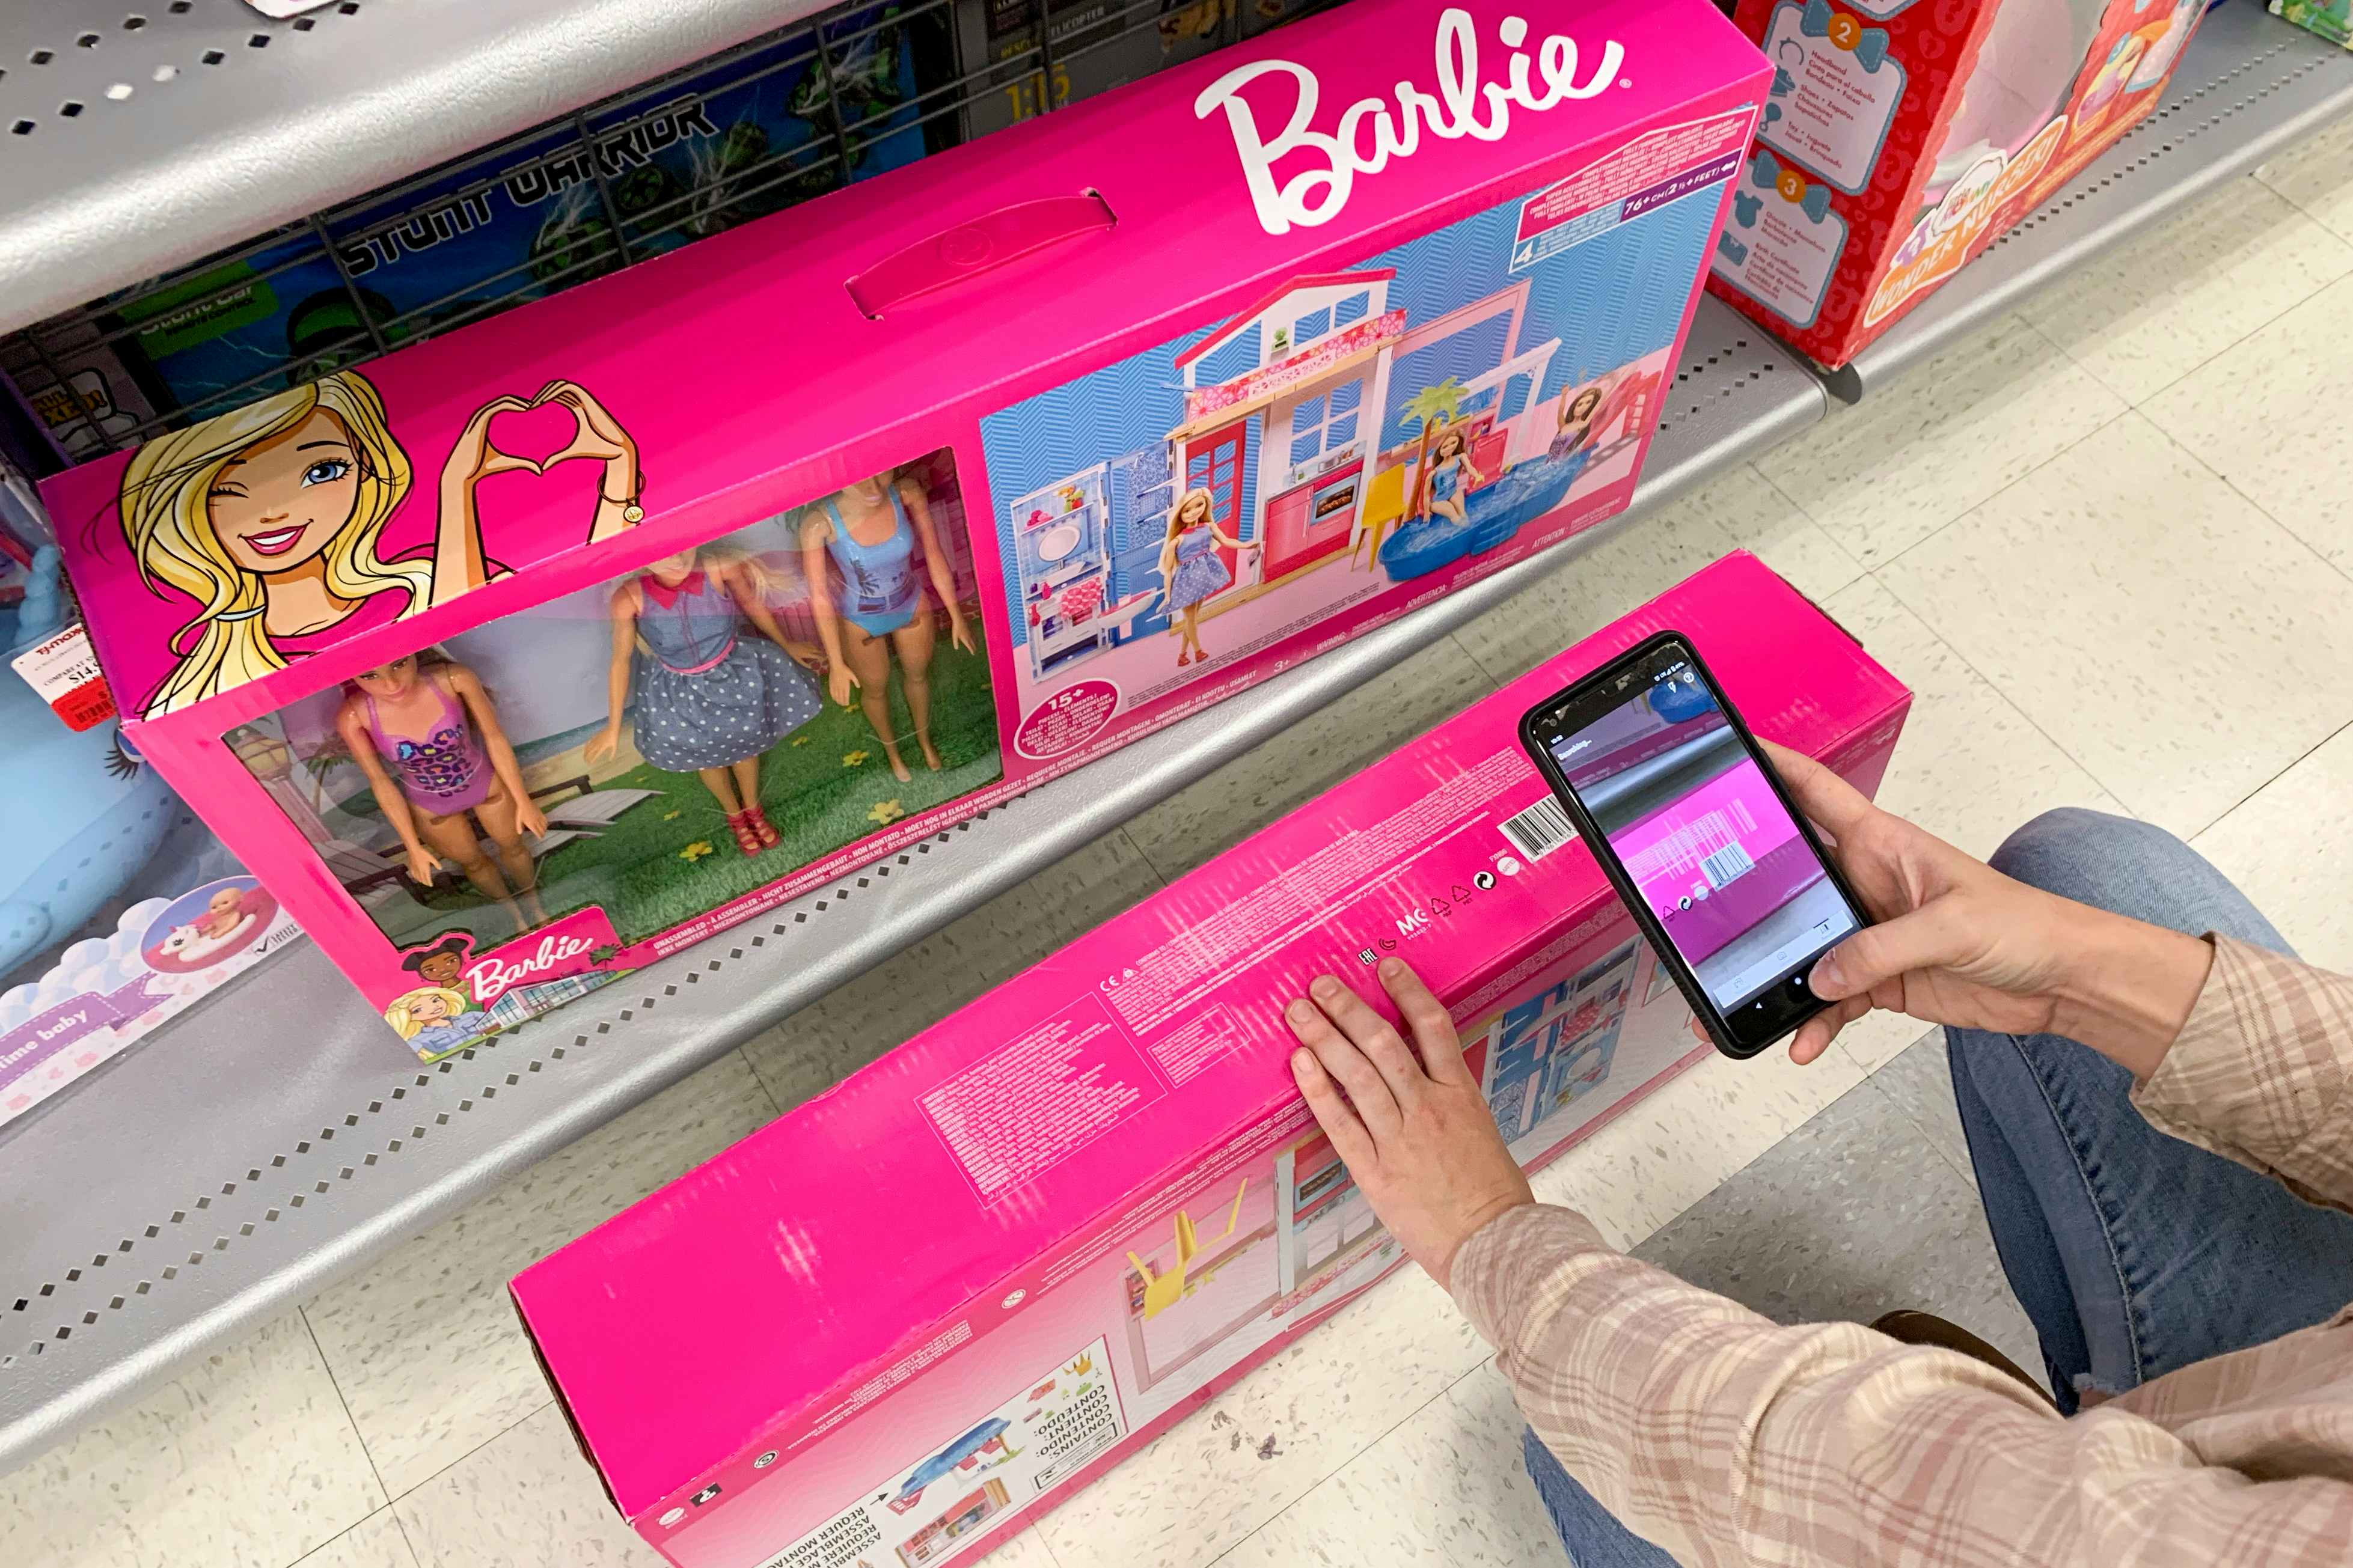 A phone with the Amazon scan price comparison, scanning a Barbie play set.